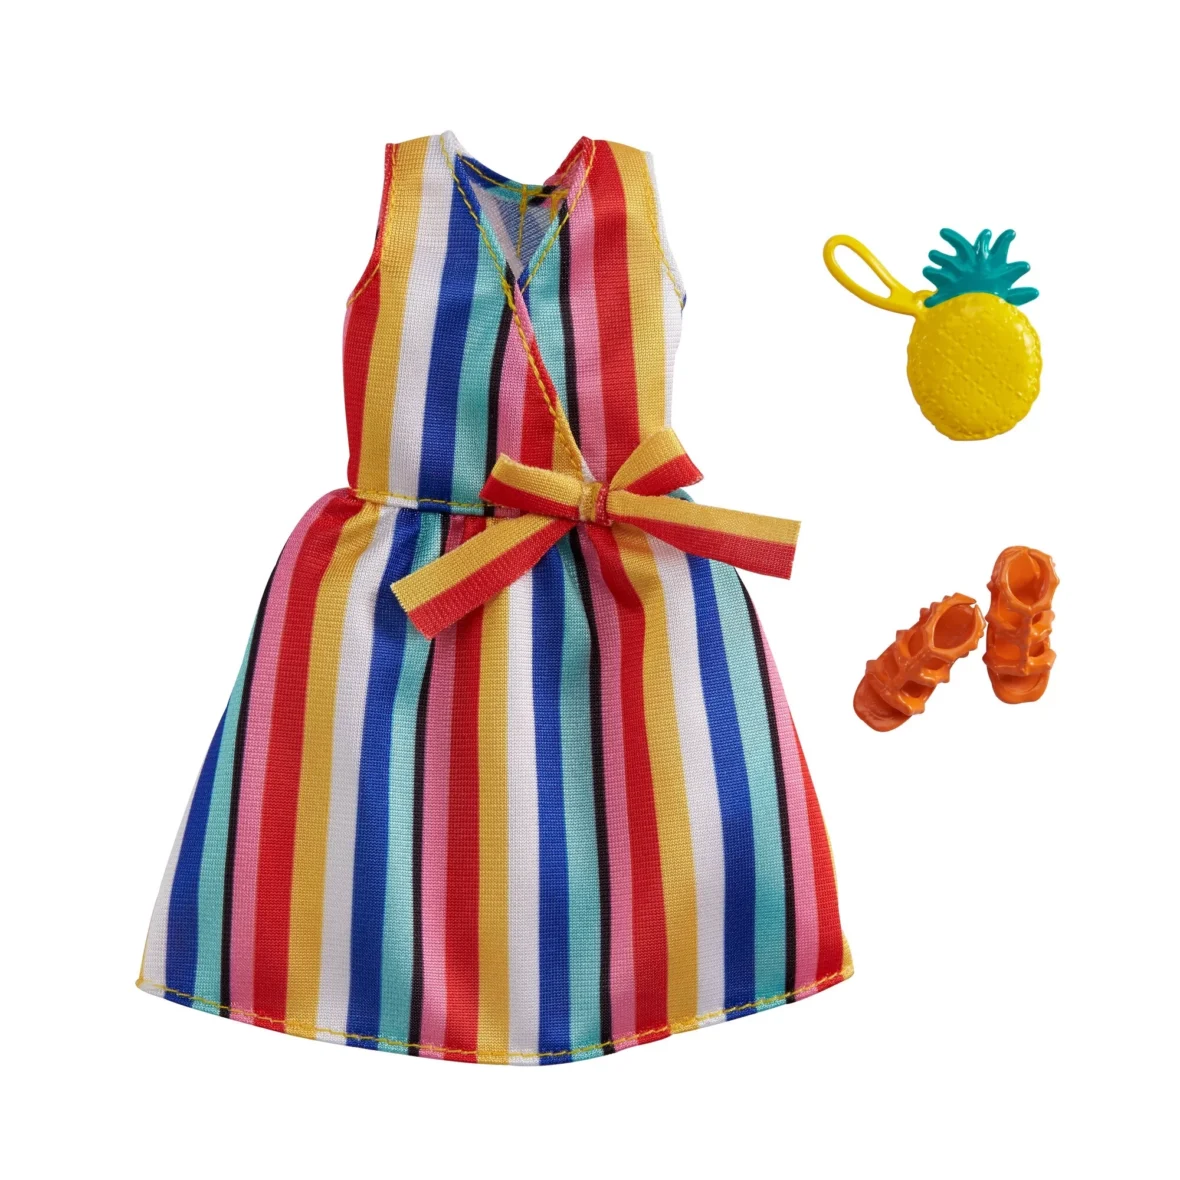 Barbie Doll Clothes: Striped Dress & 2 Accessories